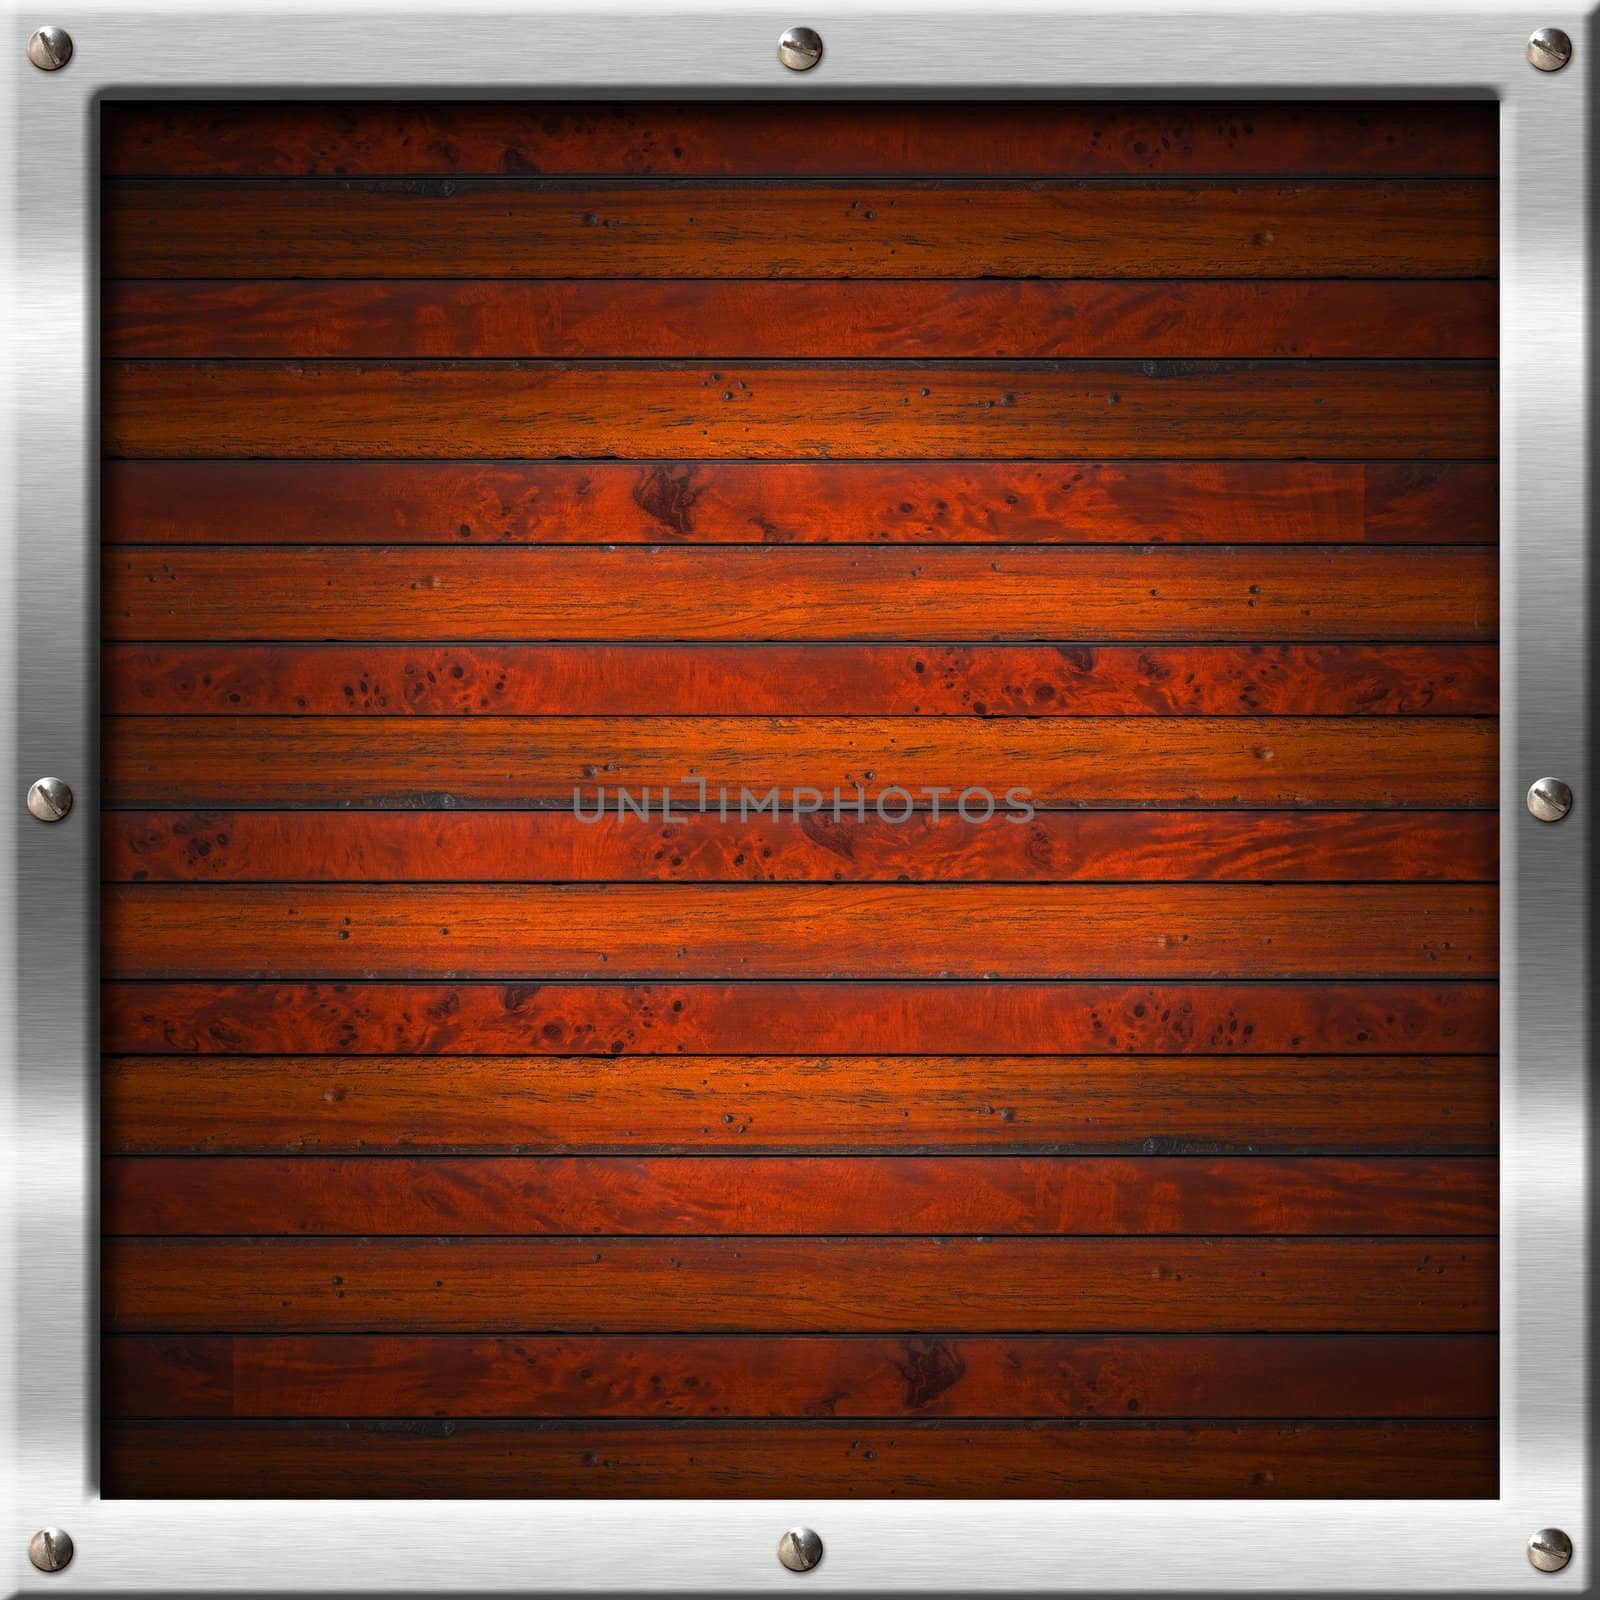 Metallic and wooden frame with screws heads


